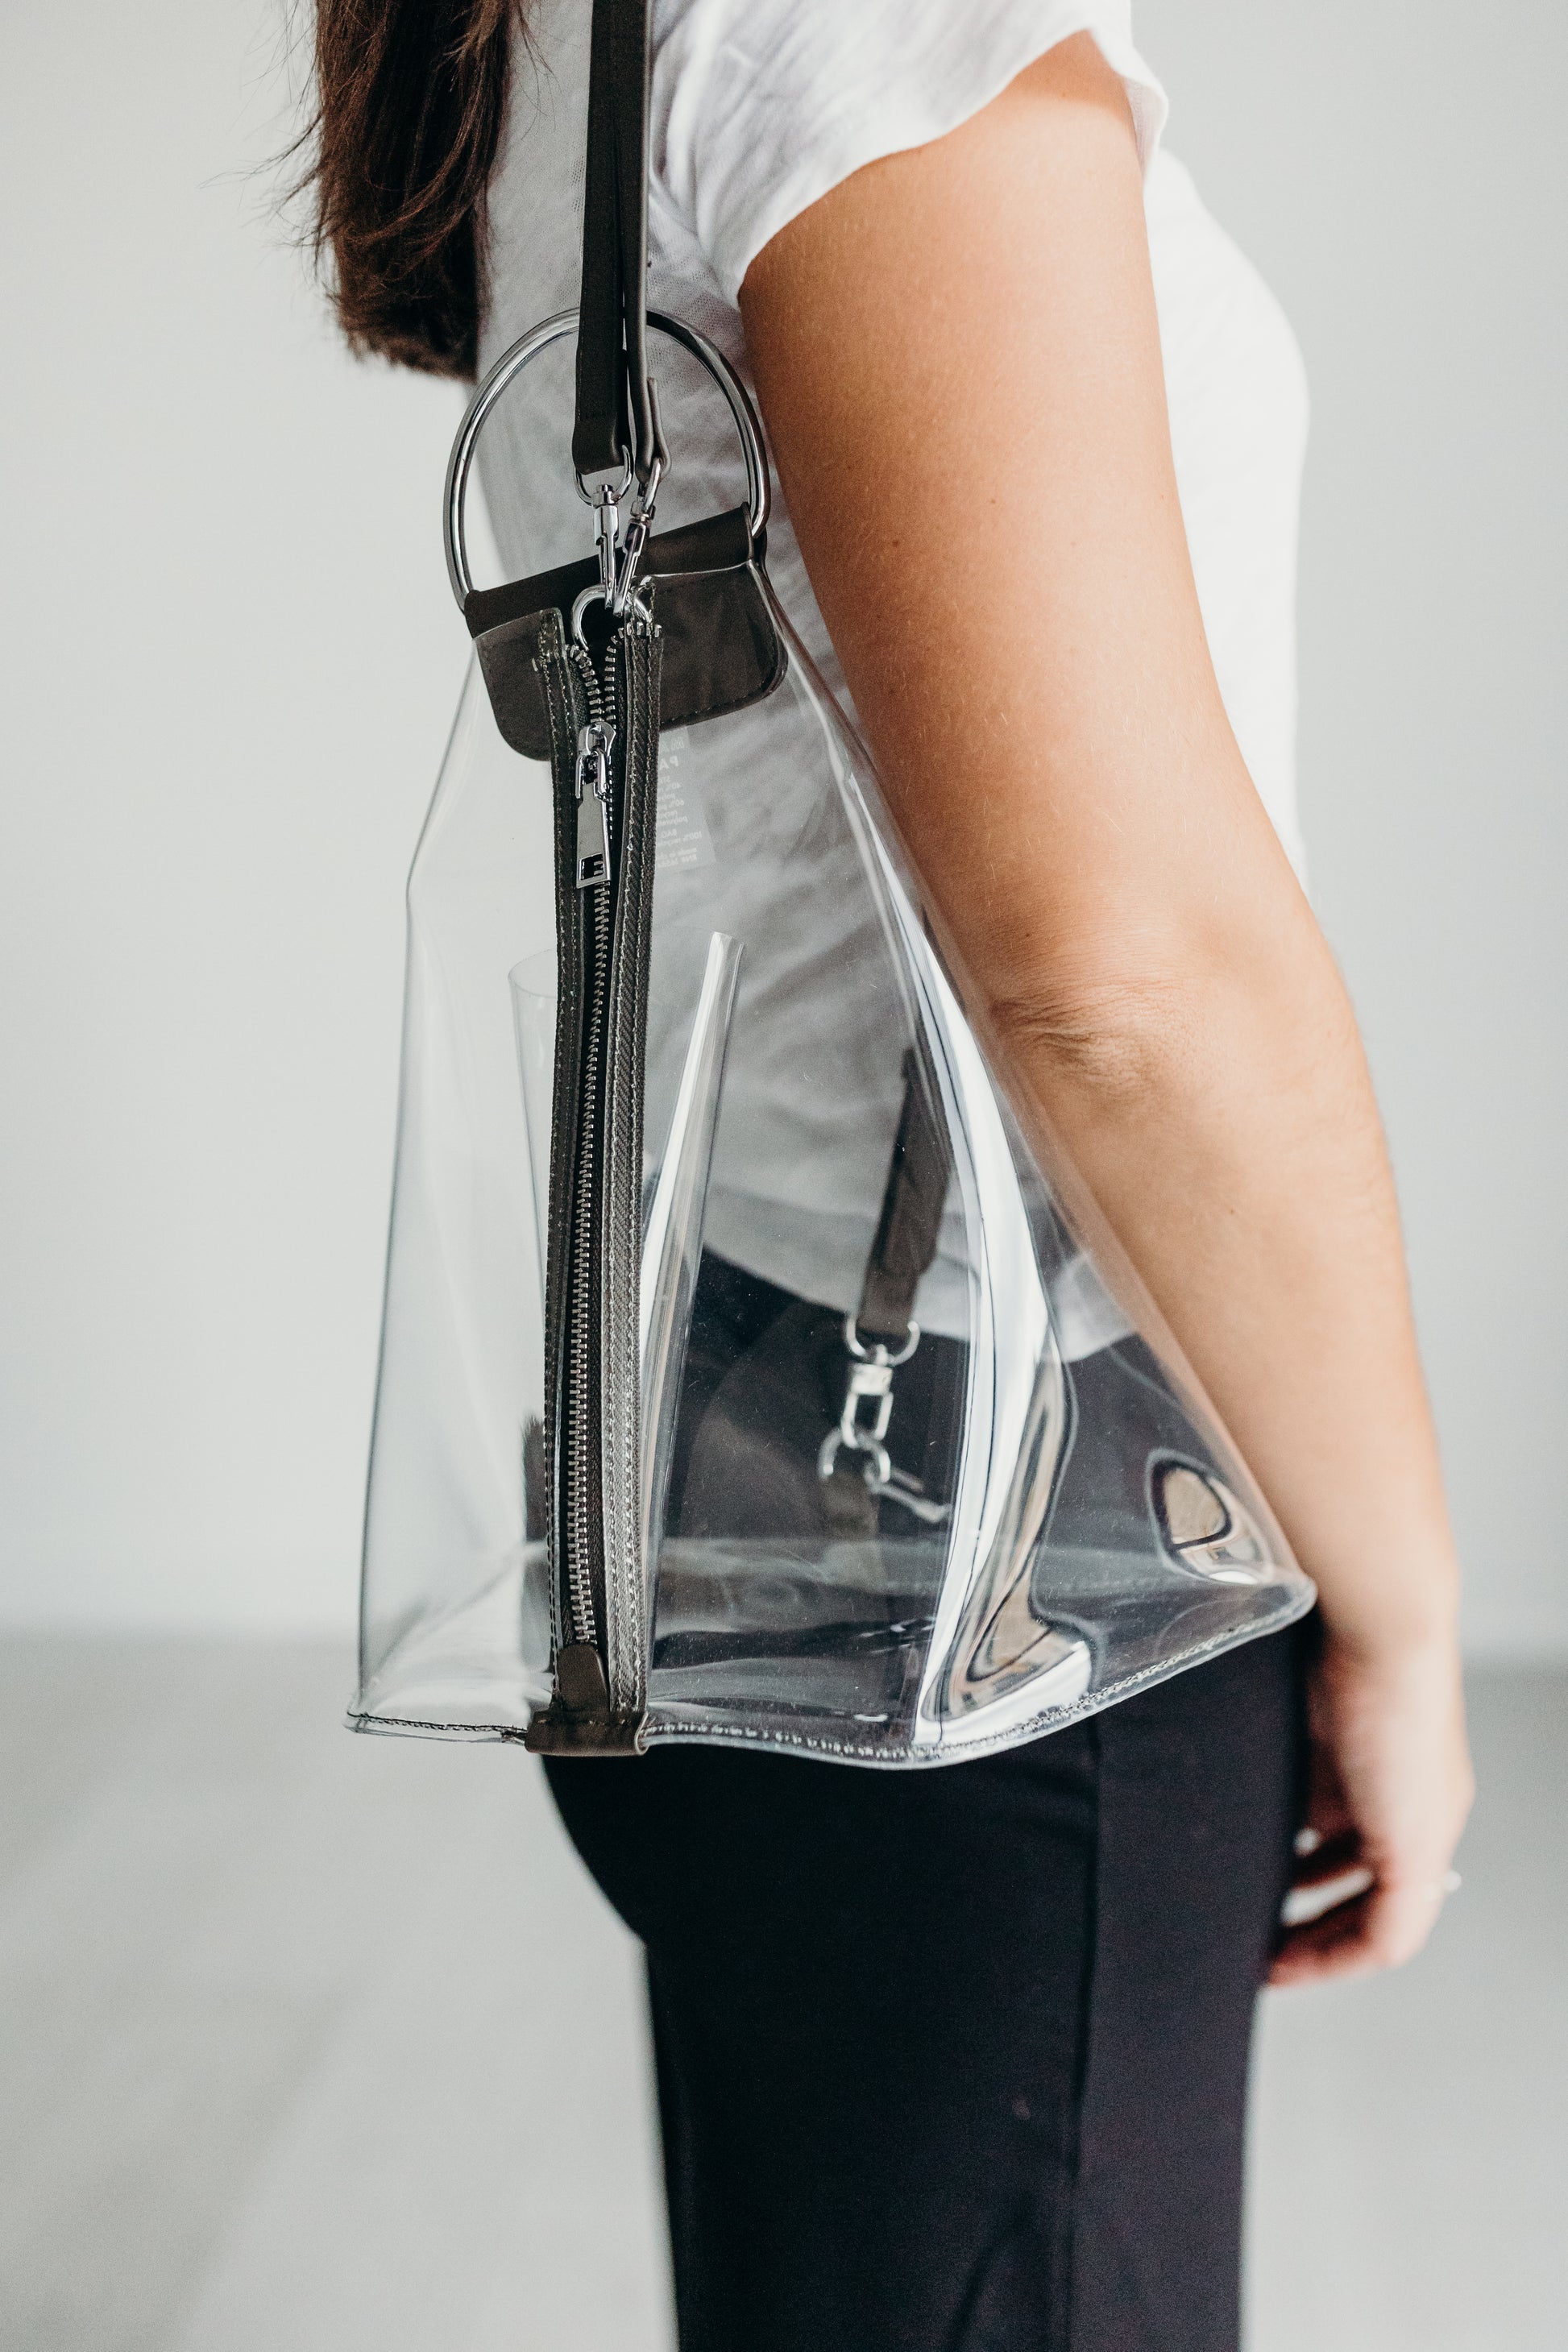 Clear Backpacks  Transparent Bags - Margo Paige